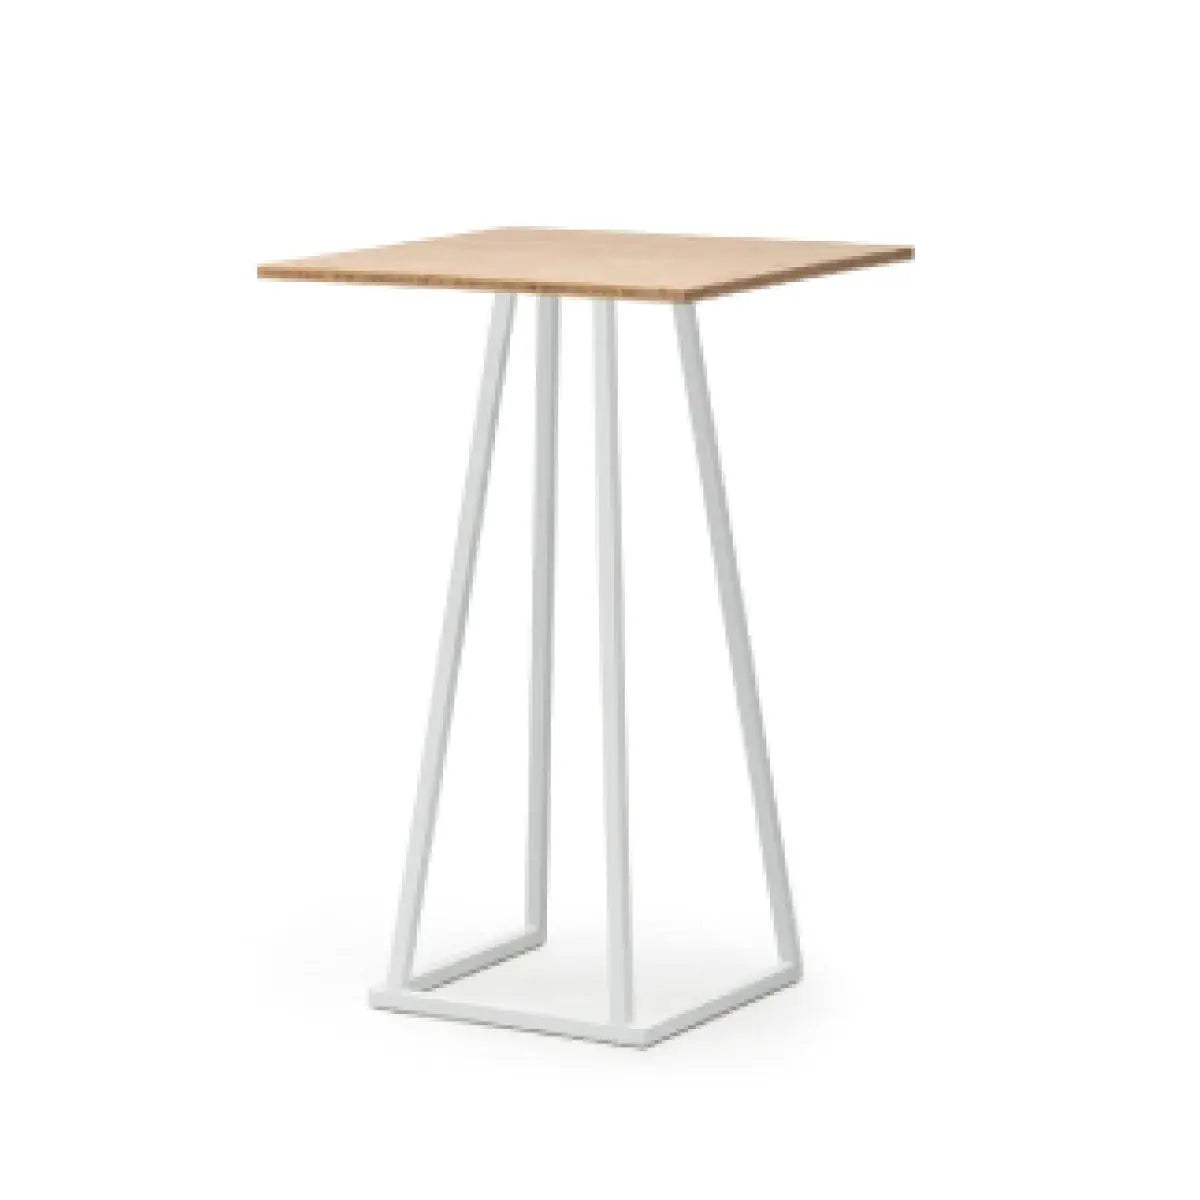 Linea cocktail table, white frame, bamboo top Desert River Rentals